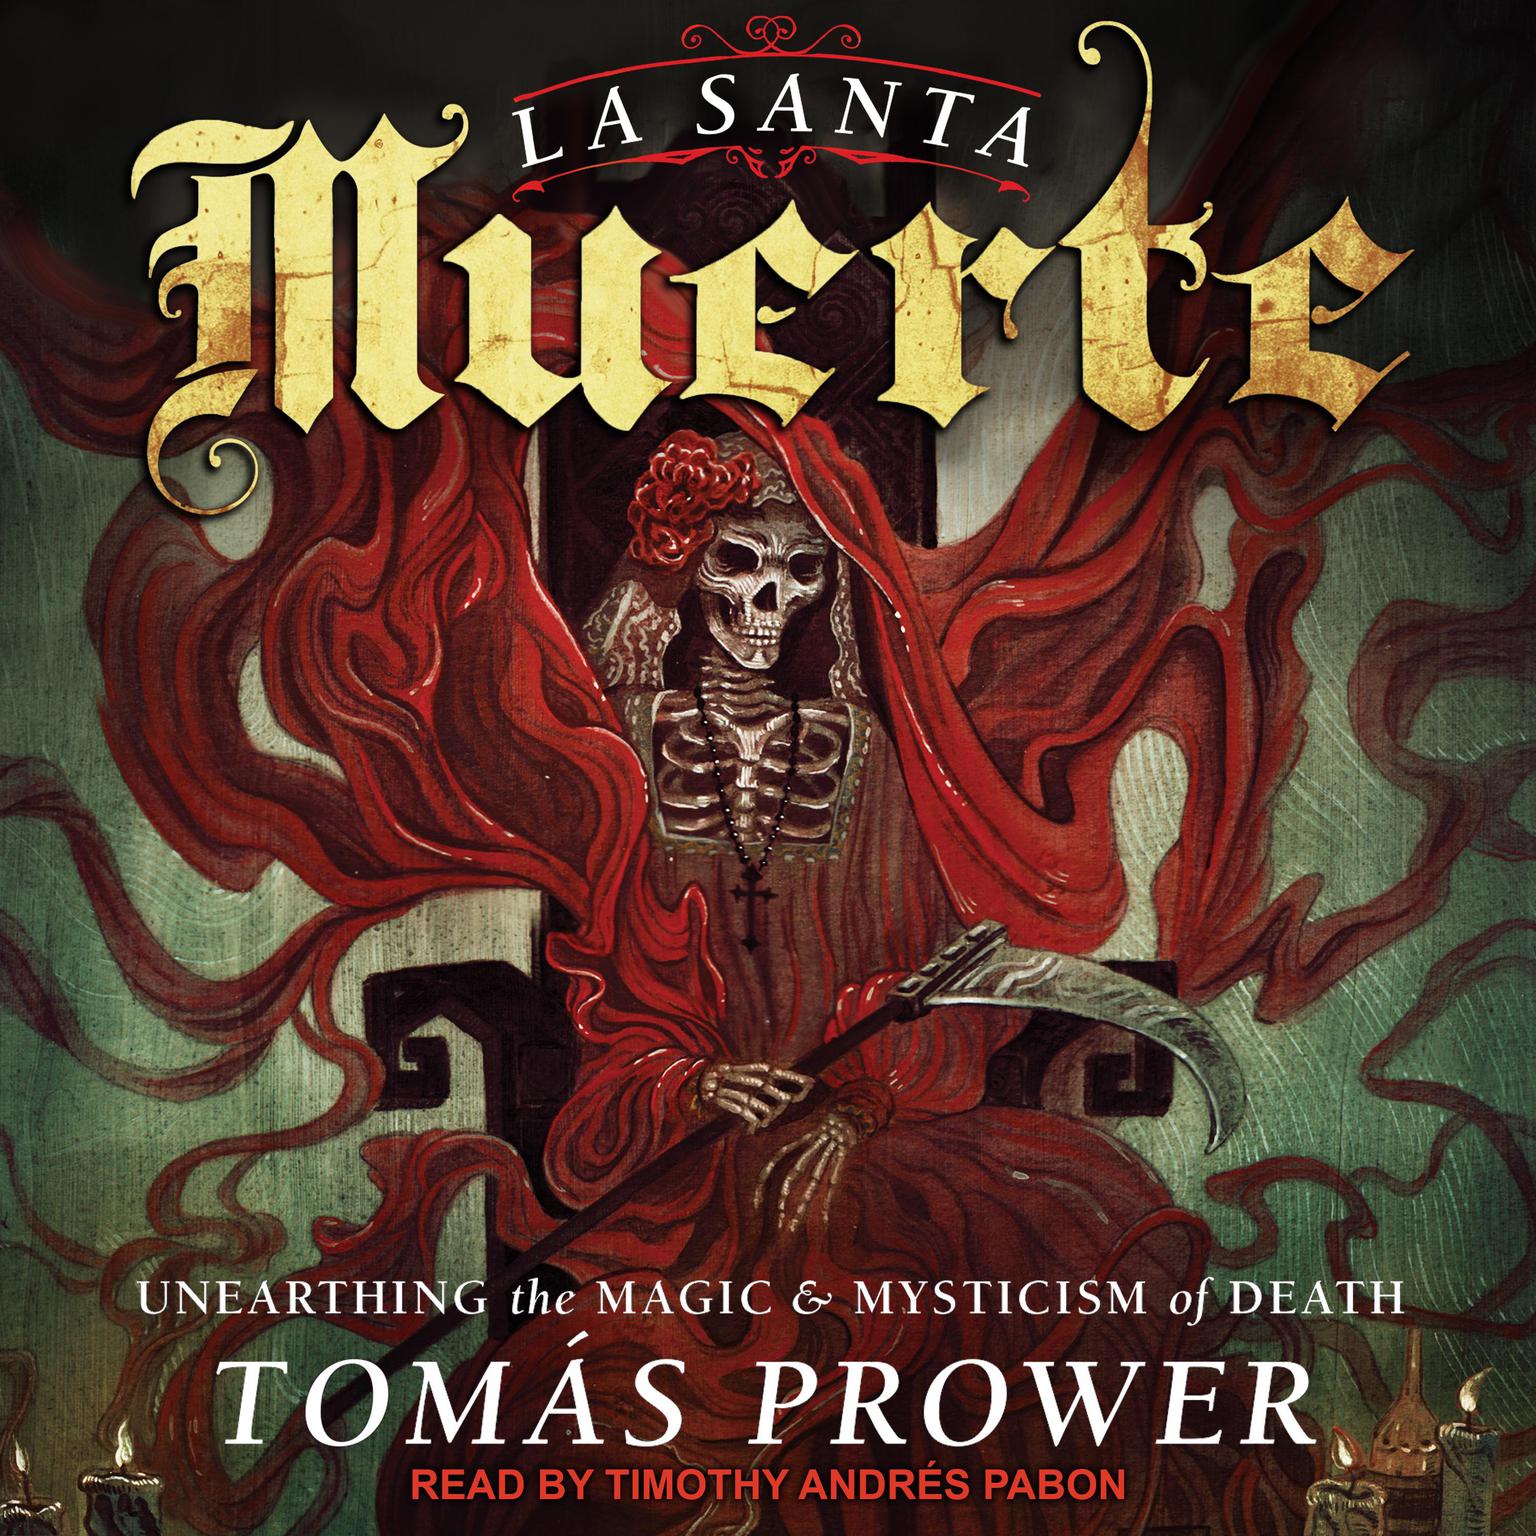 La Santa Muerte: Unearthing the Magic & Mysticism of Death Audiobook, by Tomas Prower